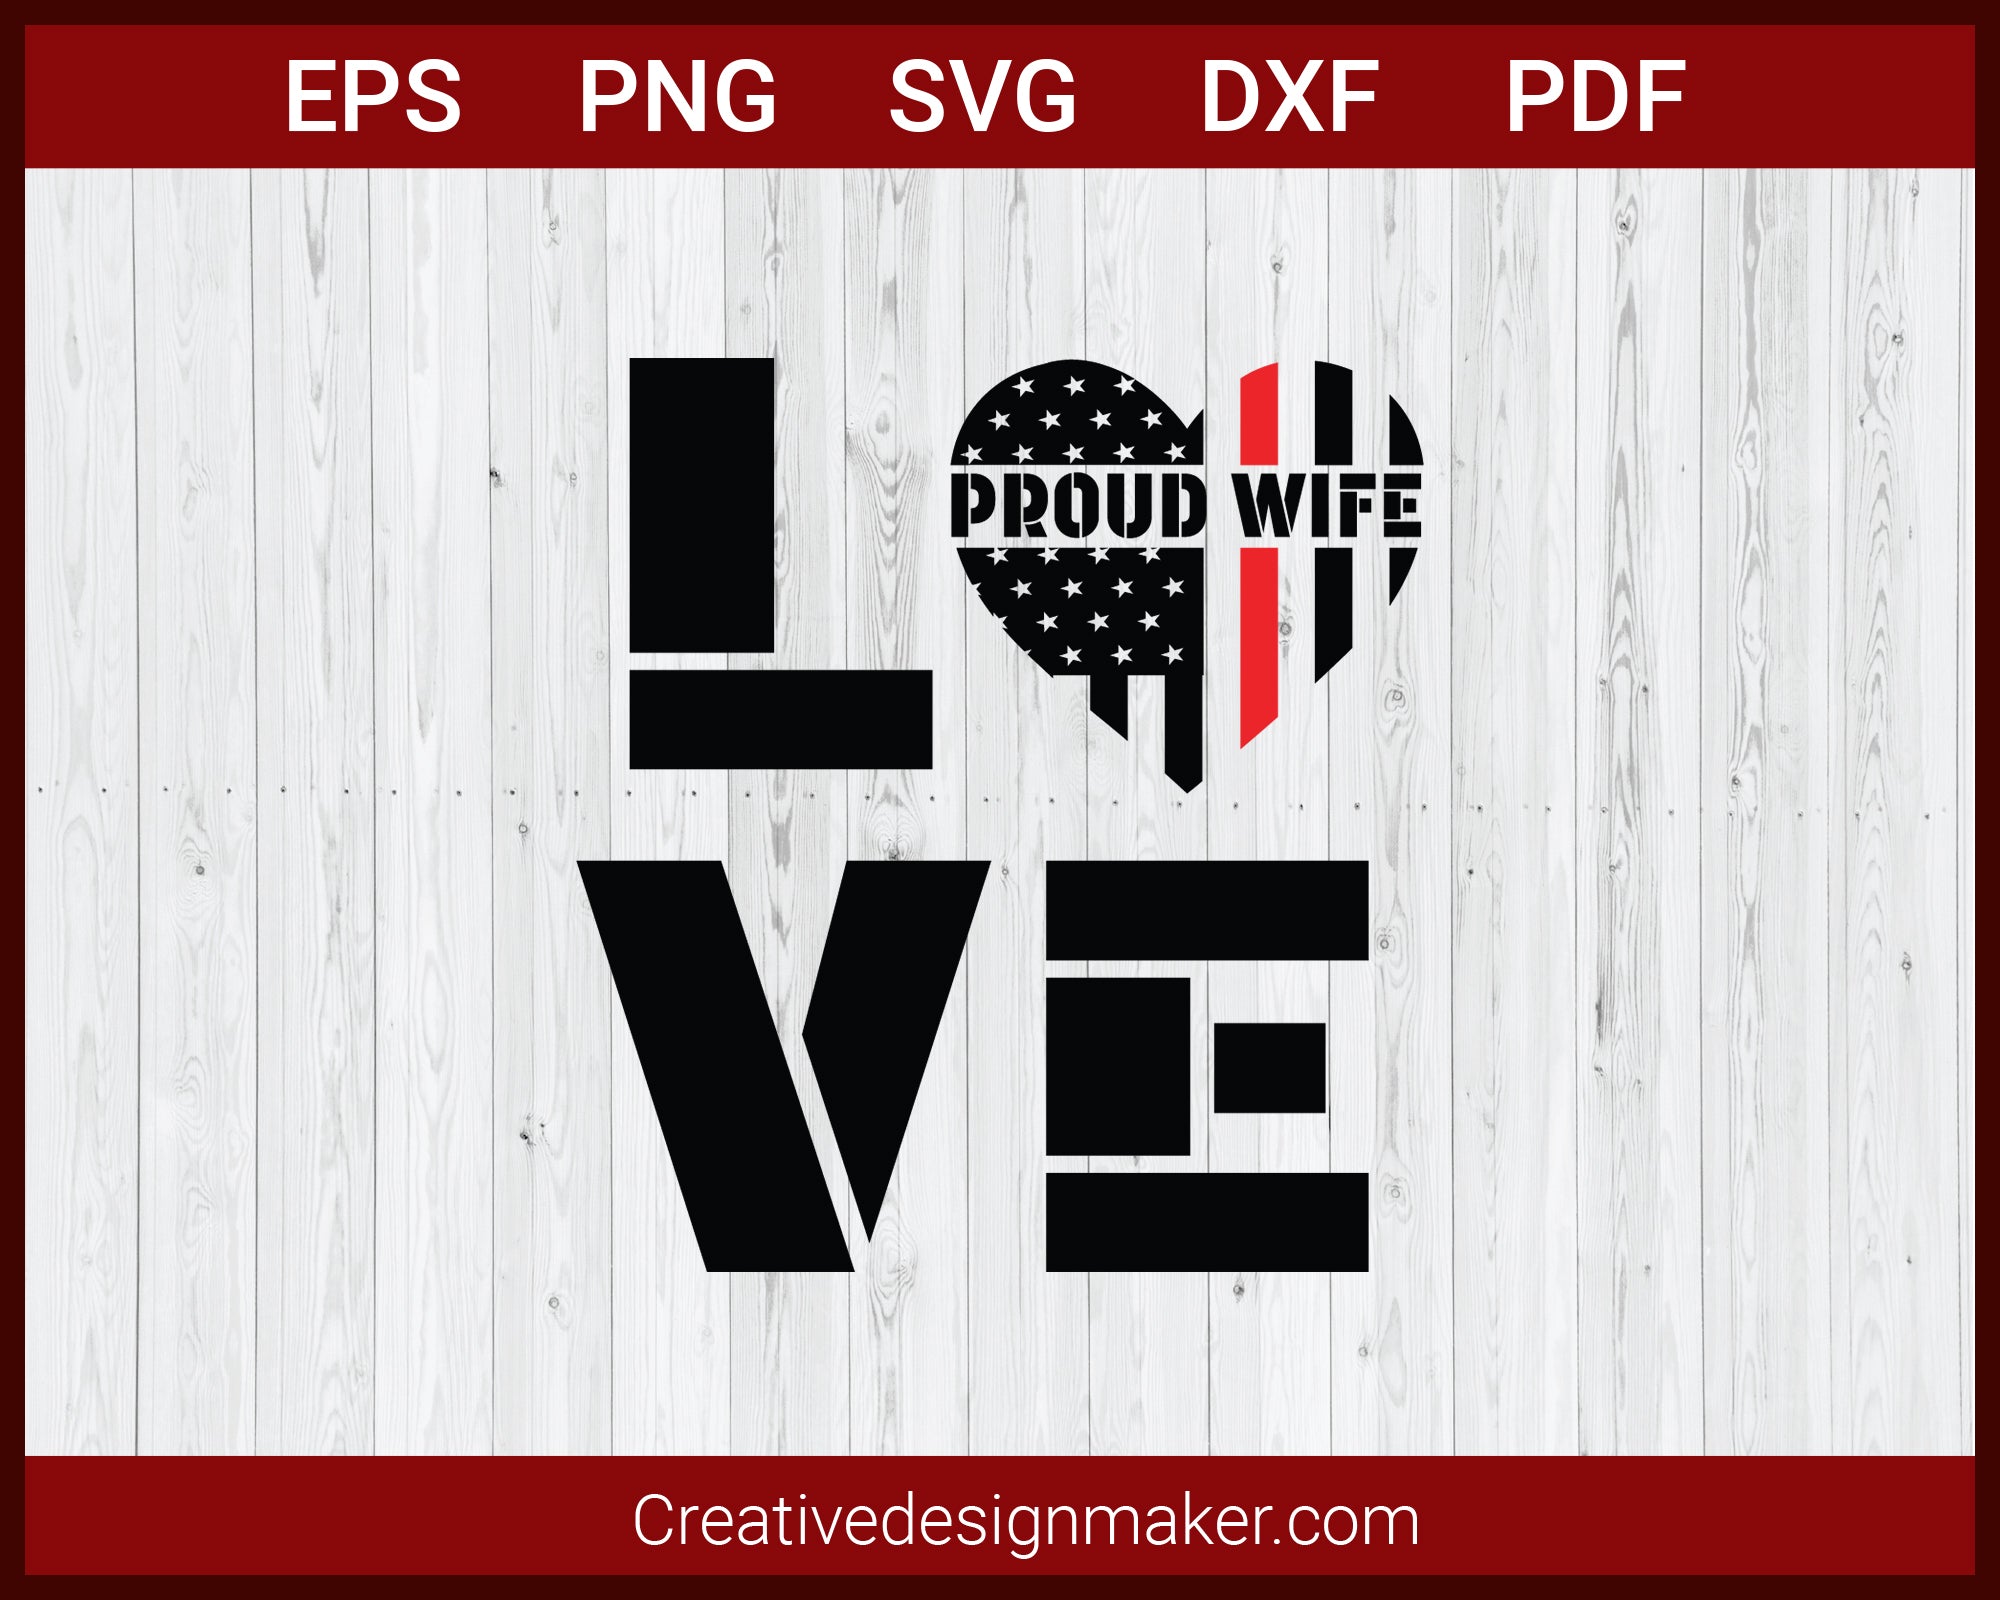 Proud Wife T-shirt svg Cut File For Cricut Silhouette eps png dxf Printable Files